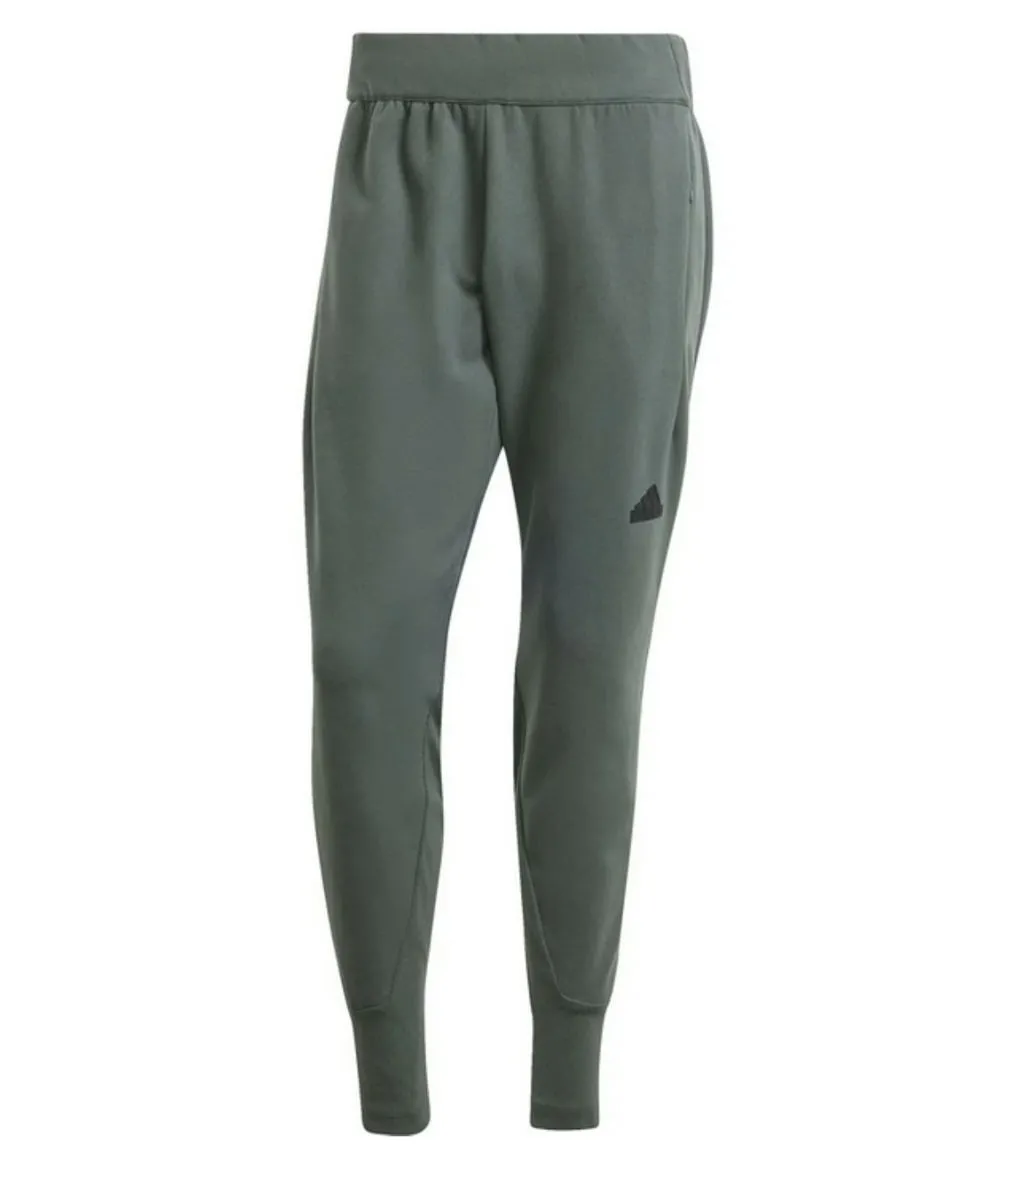 adidas men s training trousers green LEGIVY sports trousers